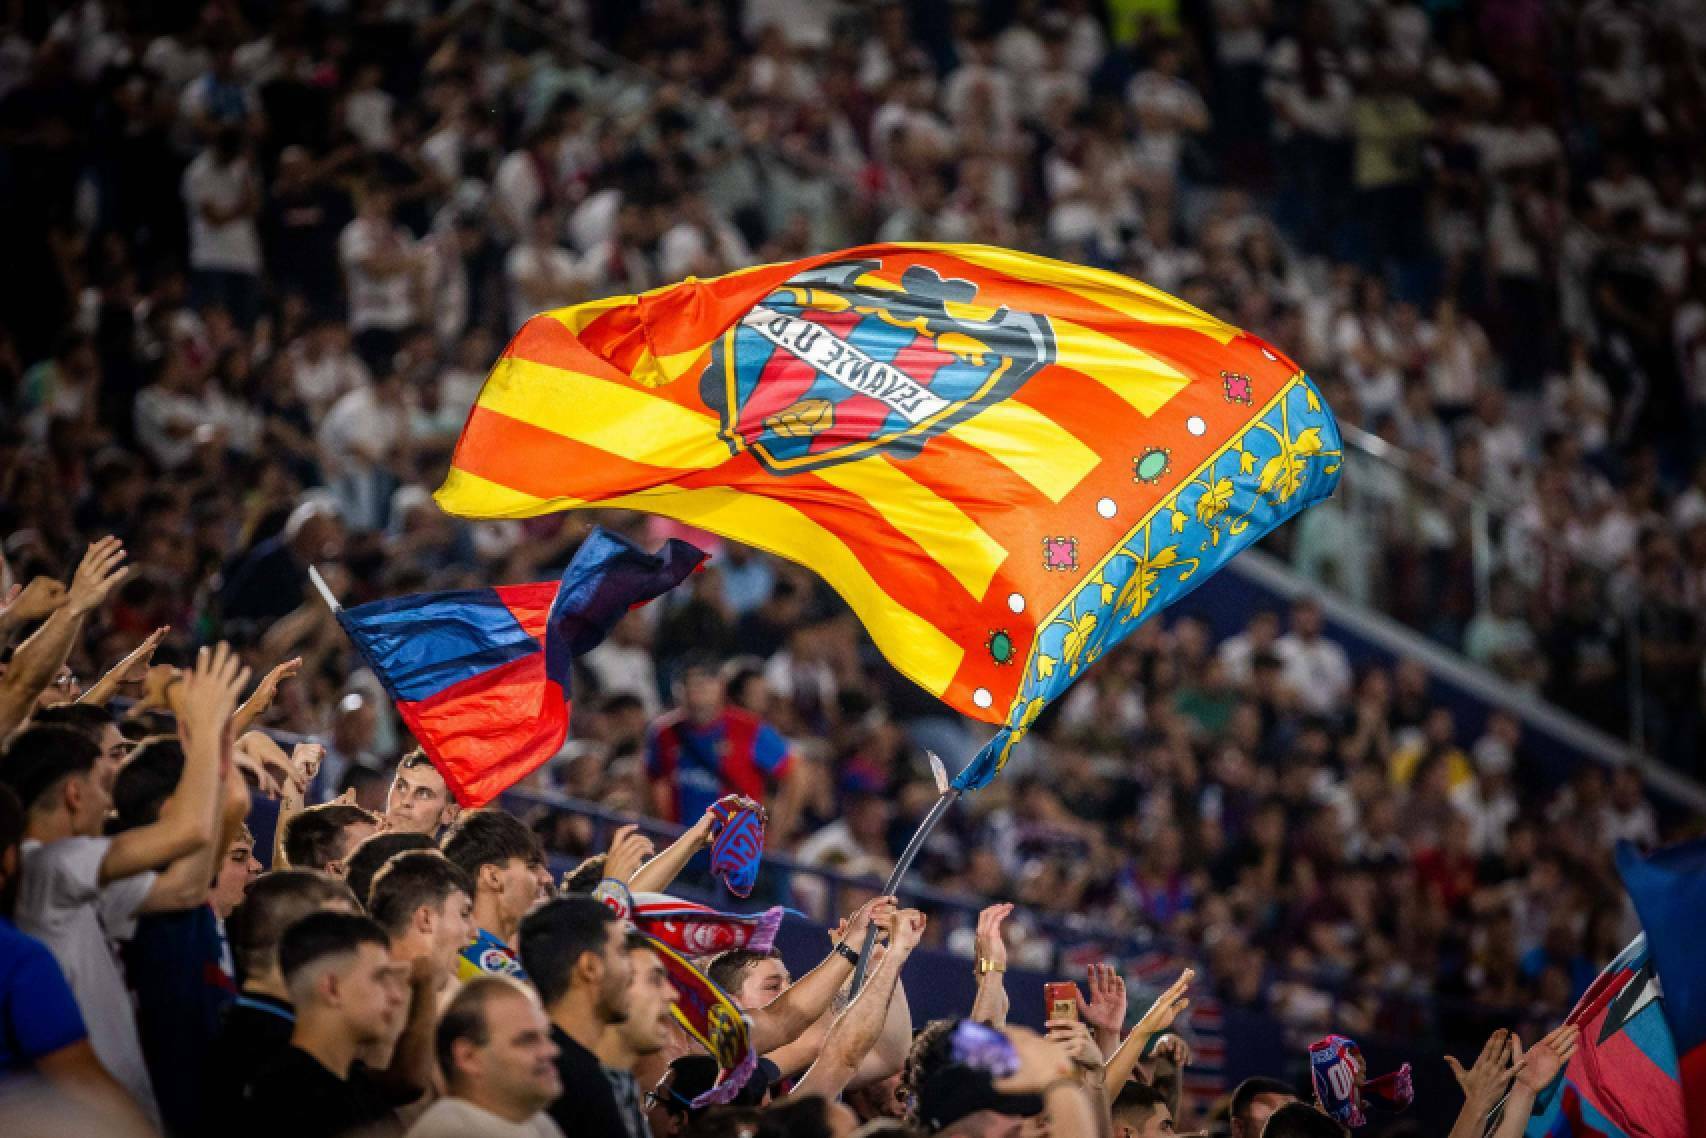 Tickets for the match against CD Eldense are now on sale